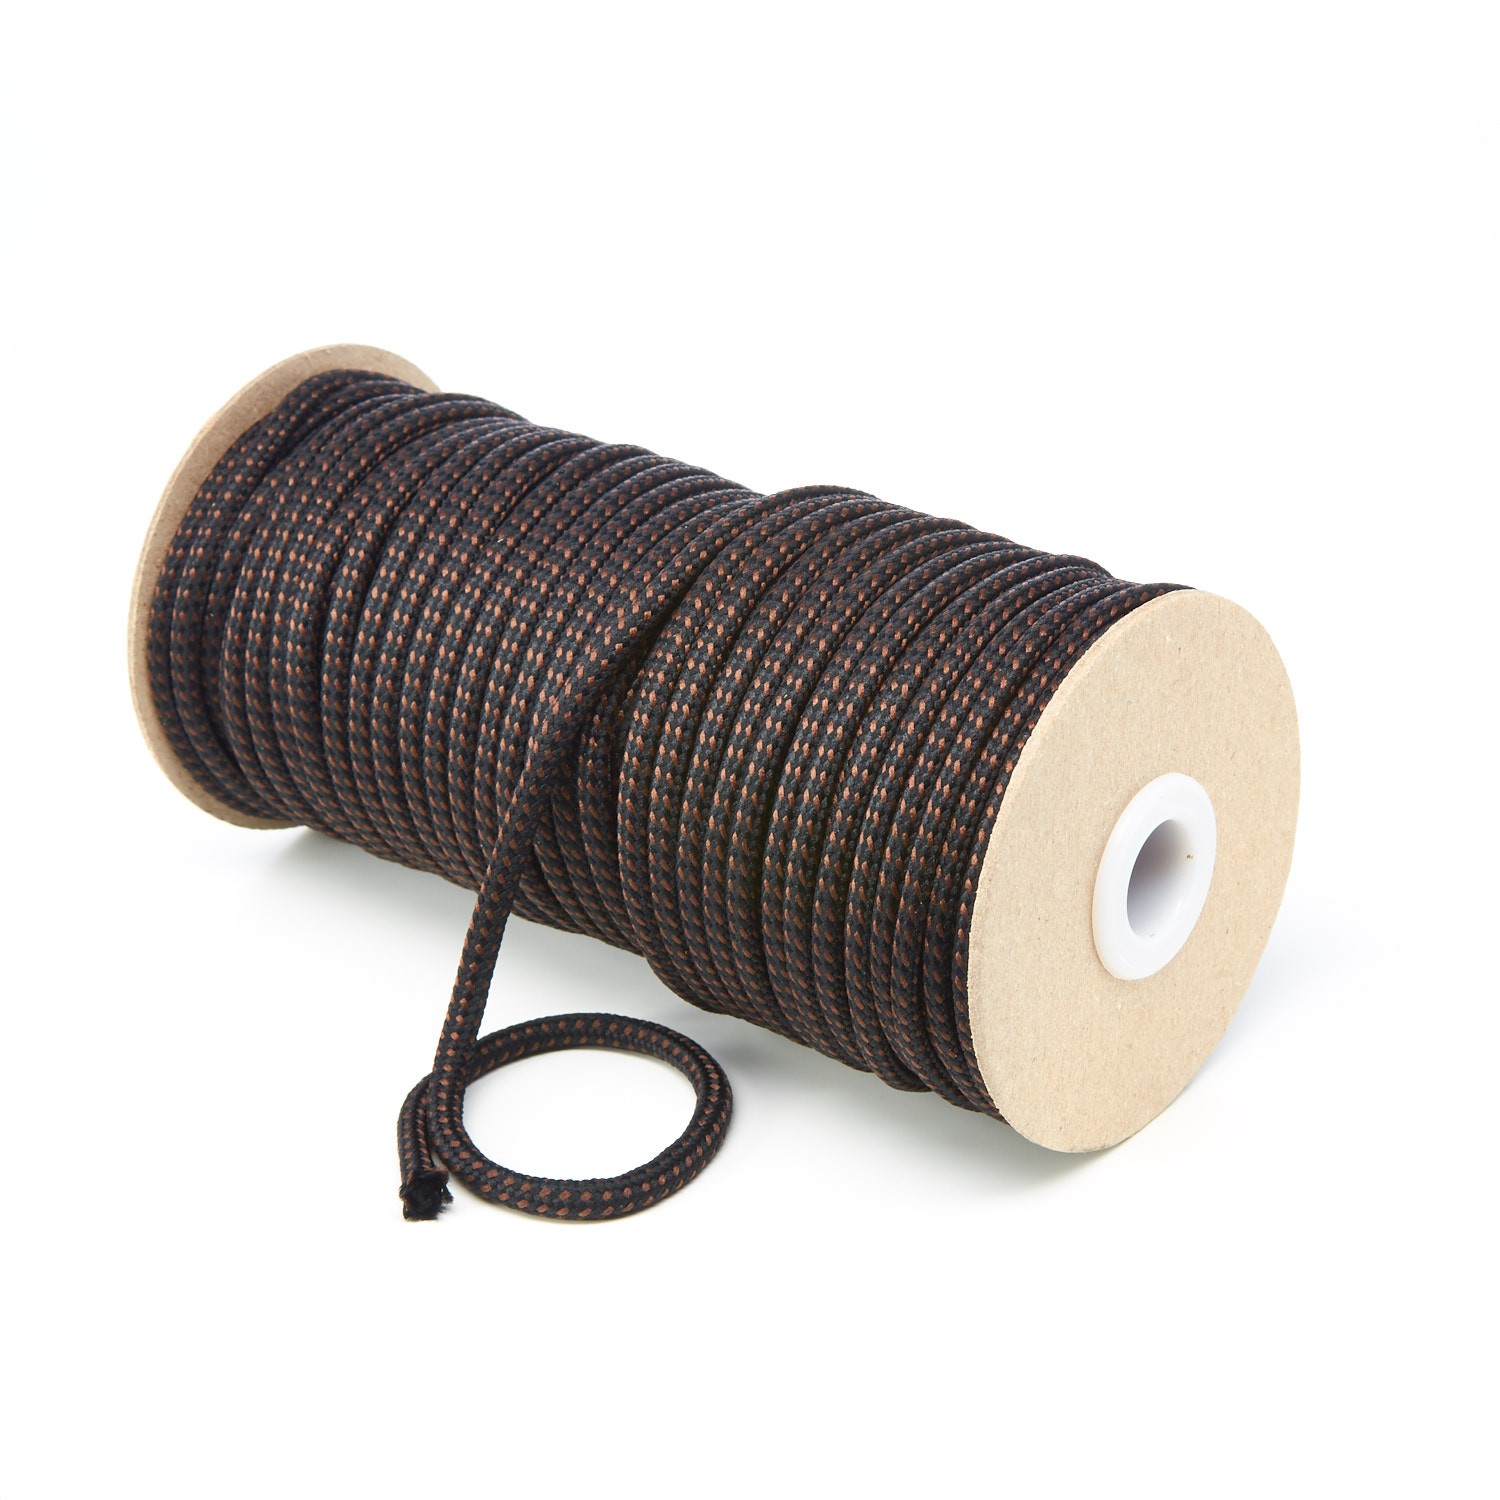 T621 Round Cord Fleck Black with York Brown Kalsi Cords